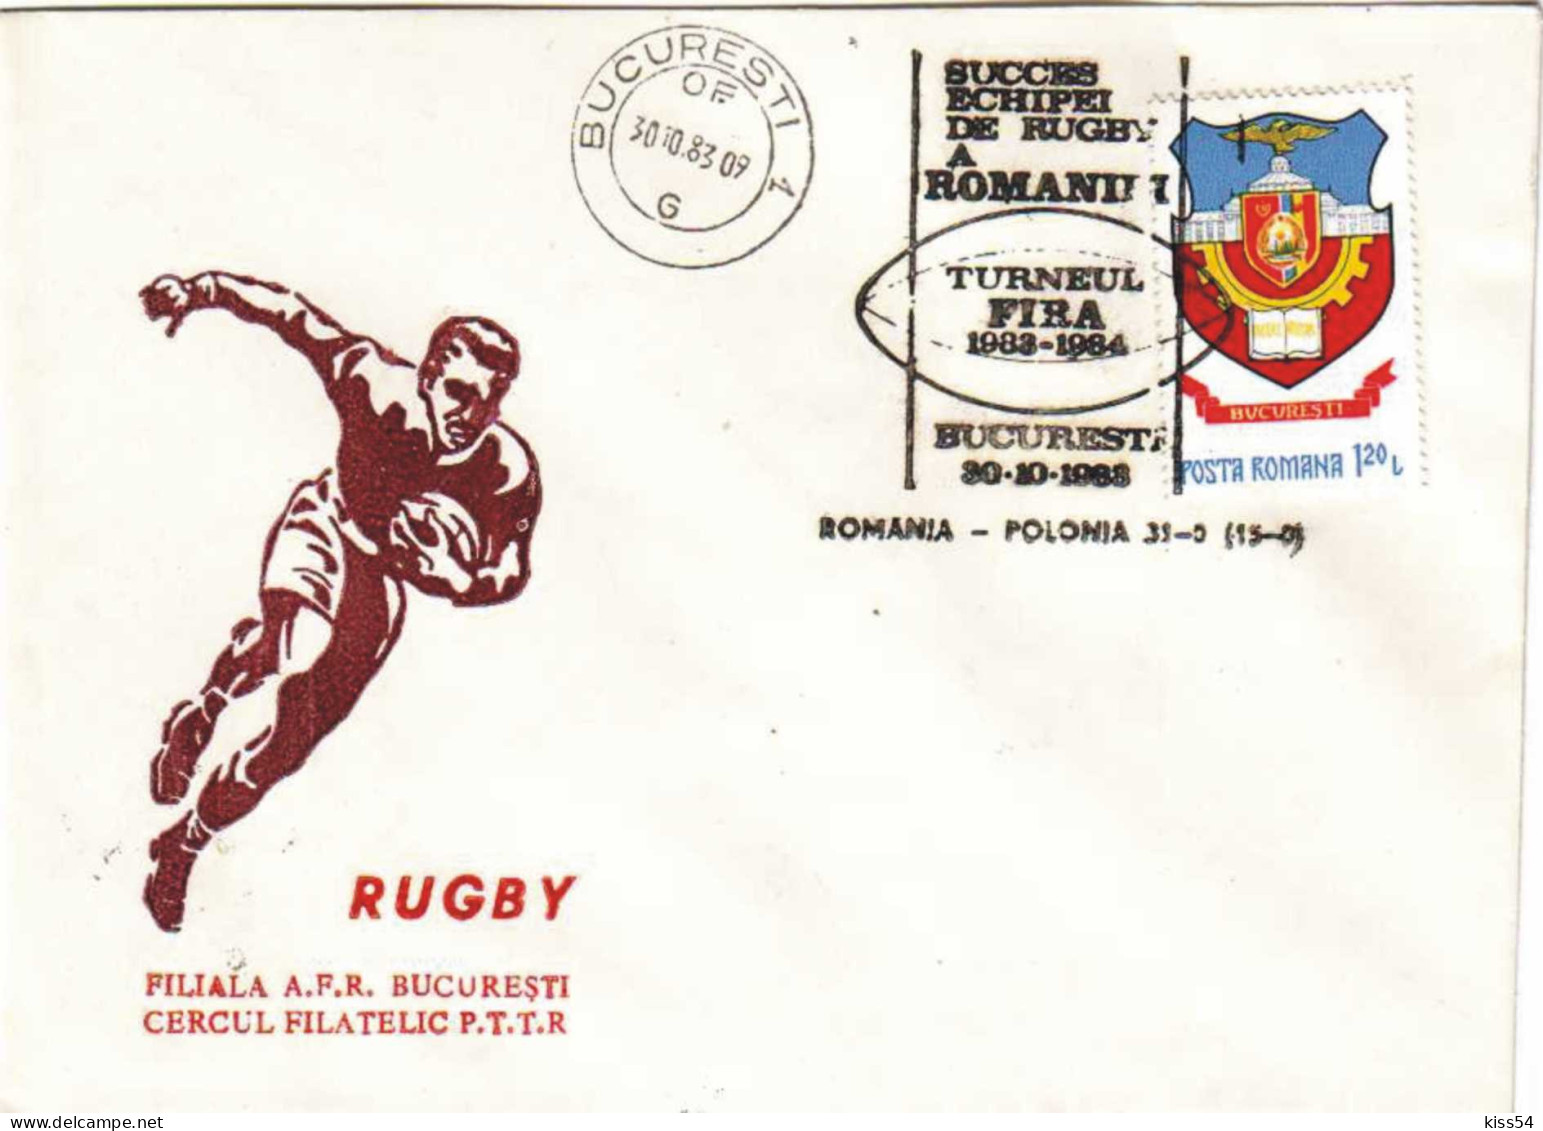 COV 17 - 25 RUGBY, Romania - Cover - Used - 1988 - Covers & Documents